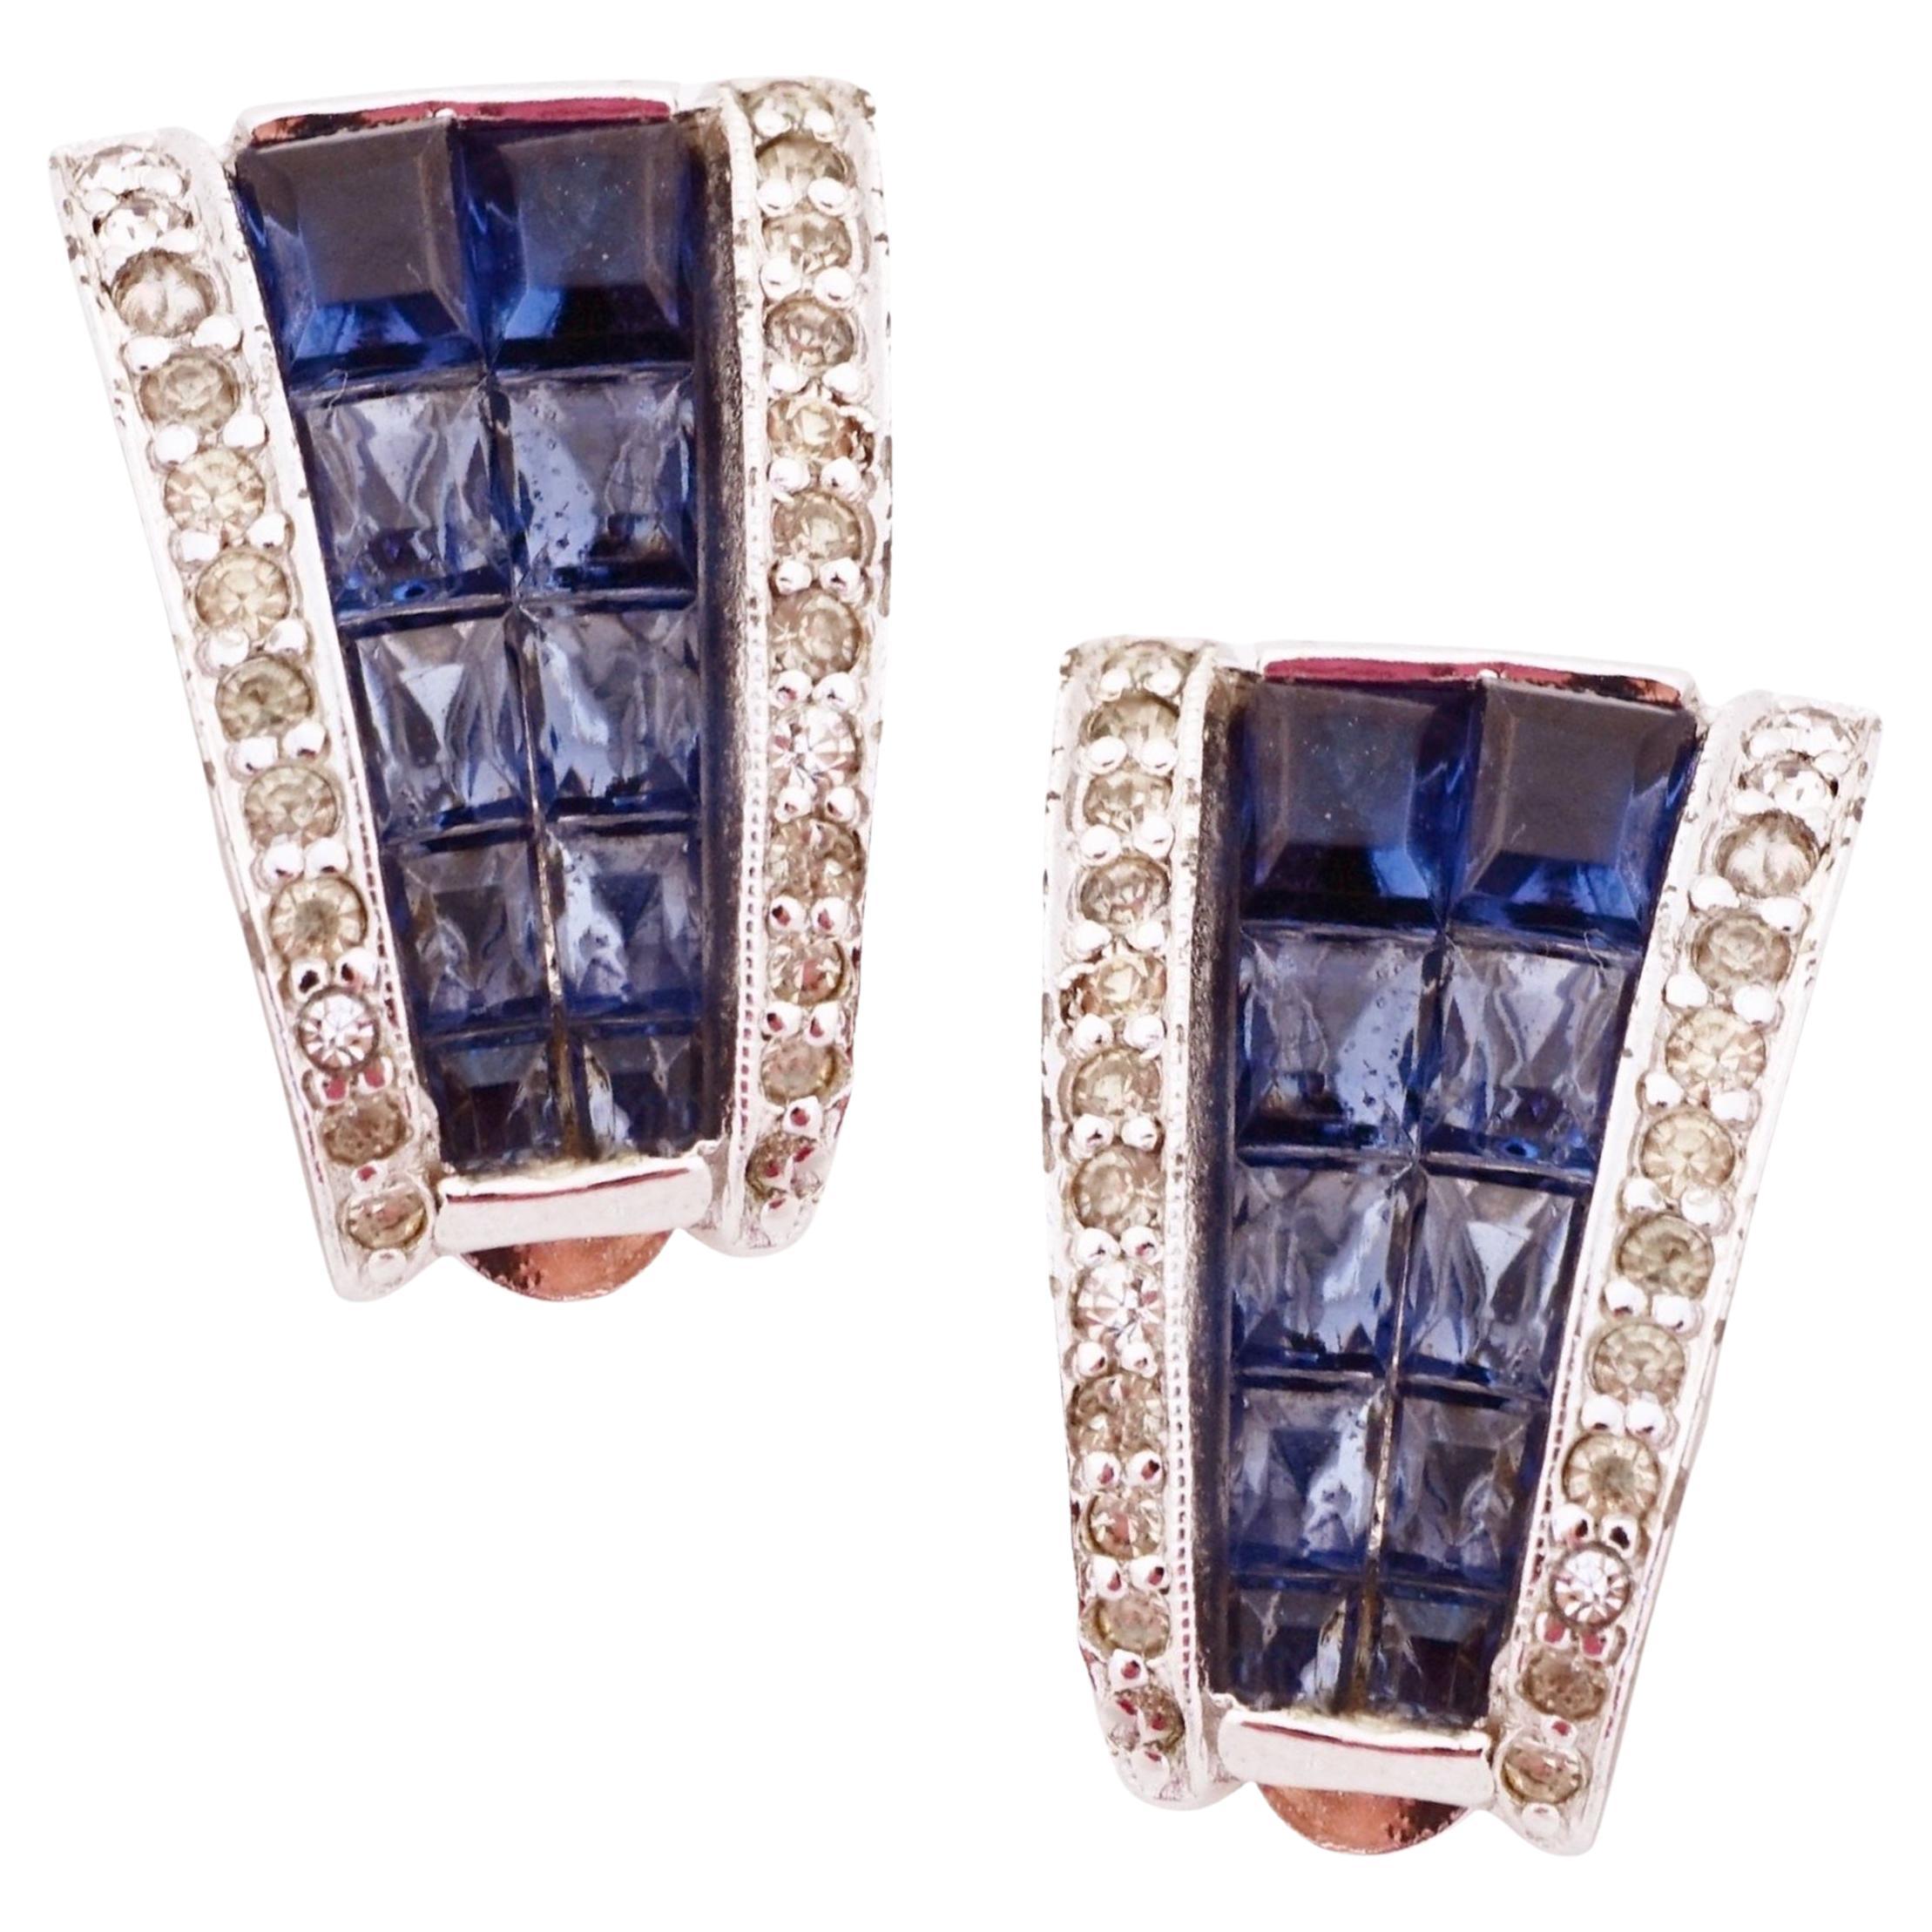 Silver Art Deco Huggie Earrings With Sapphire Crystals By Jomaz, 1950s